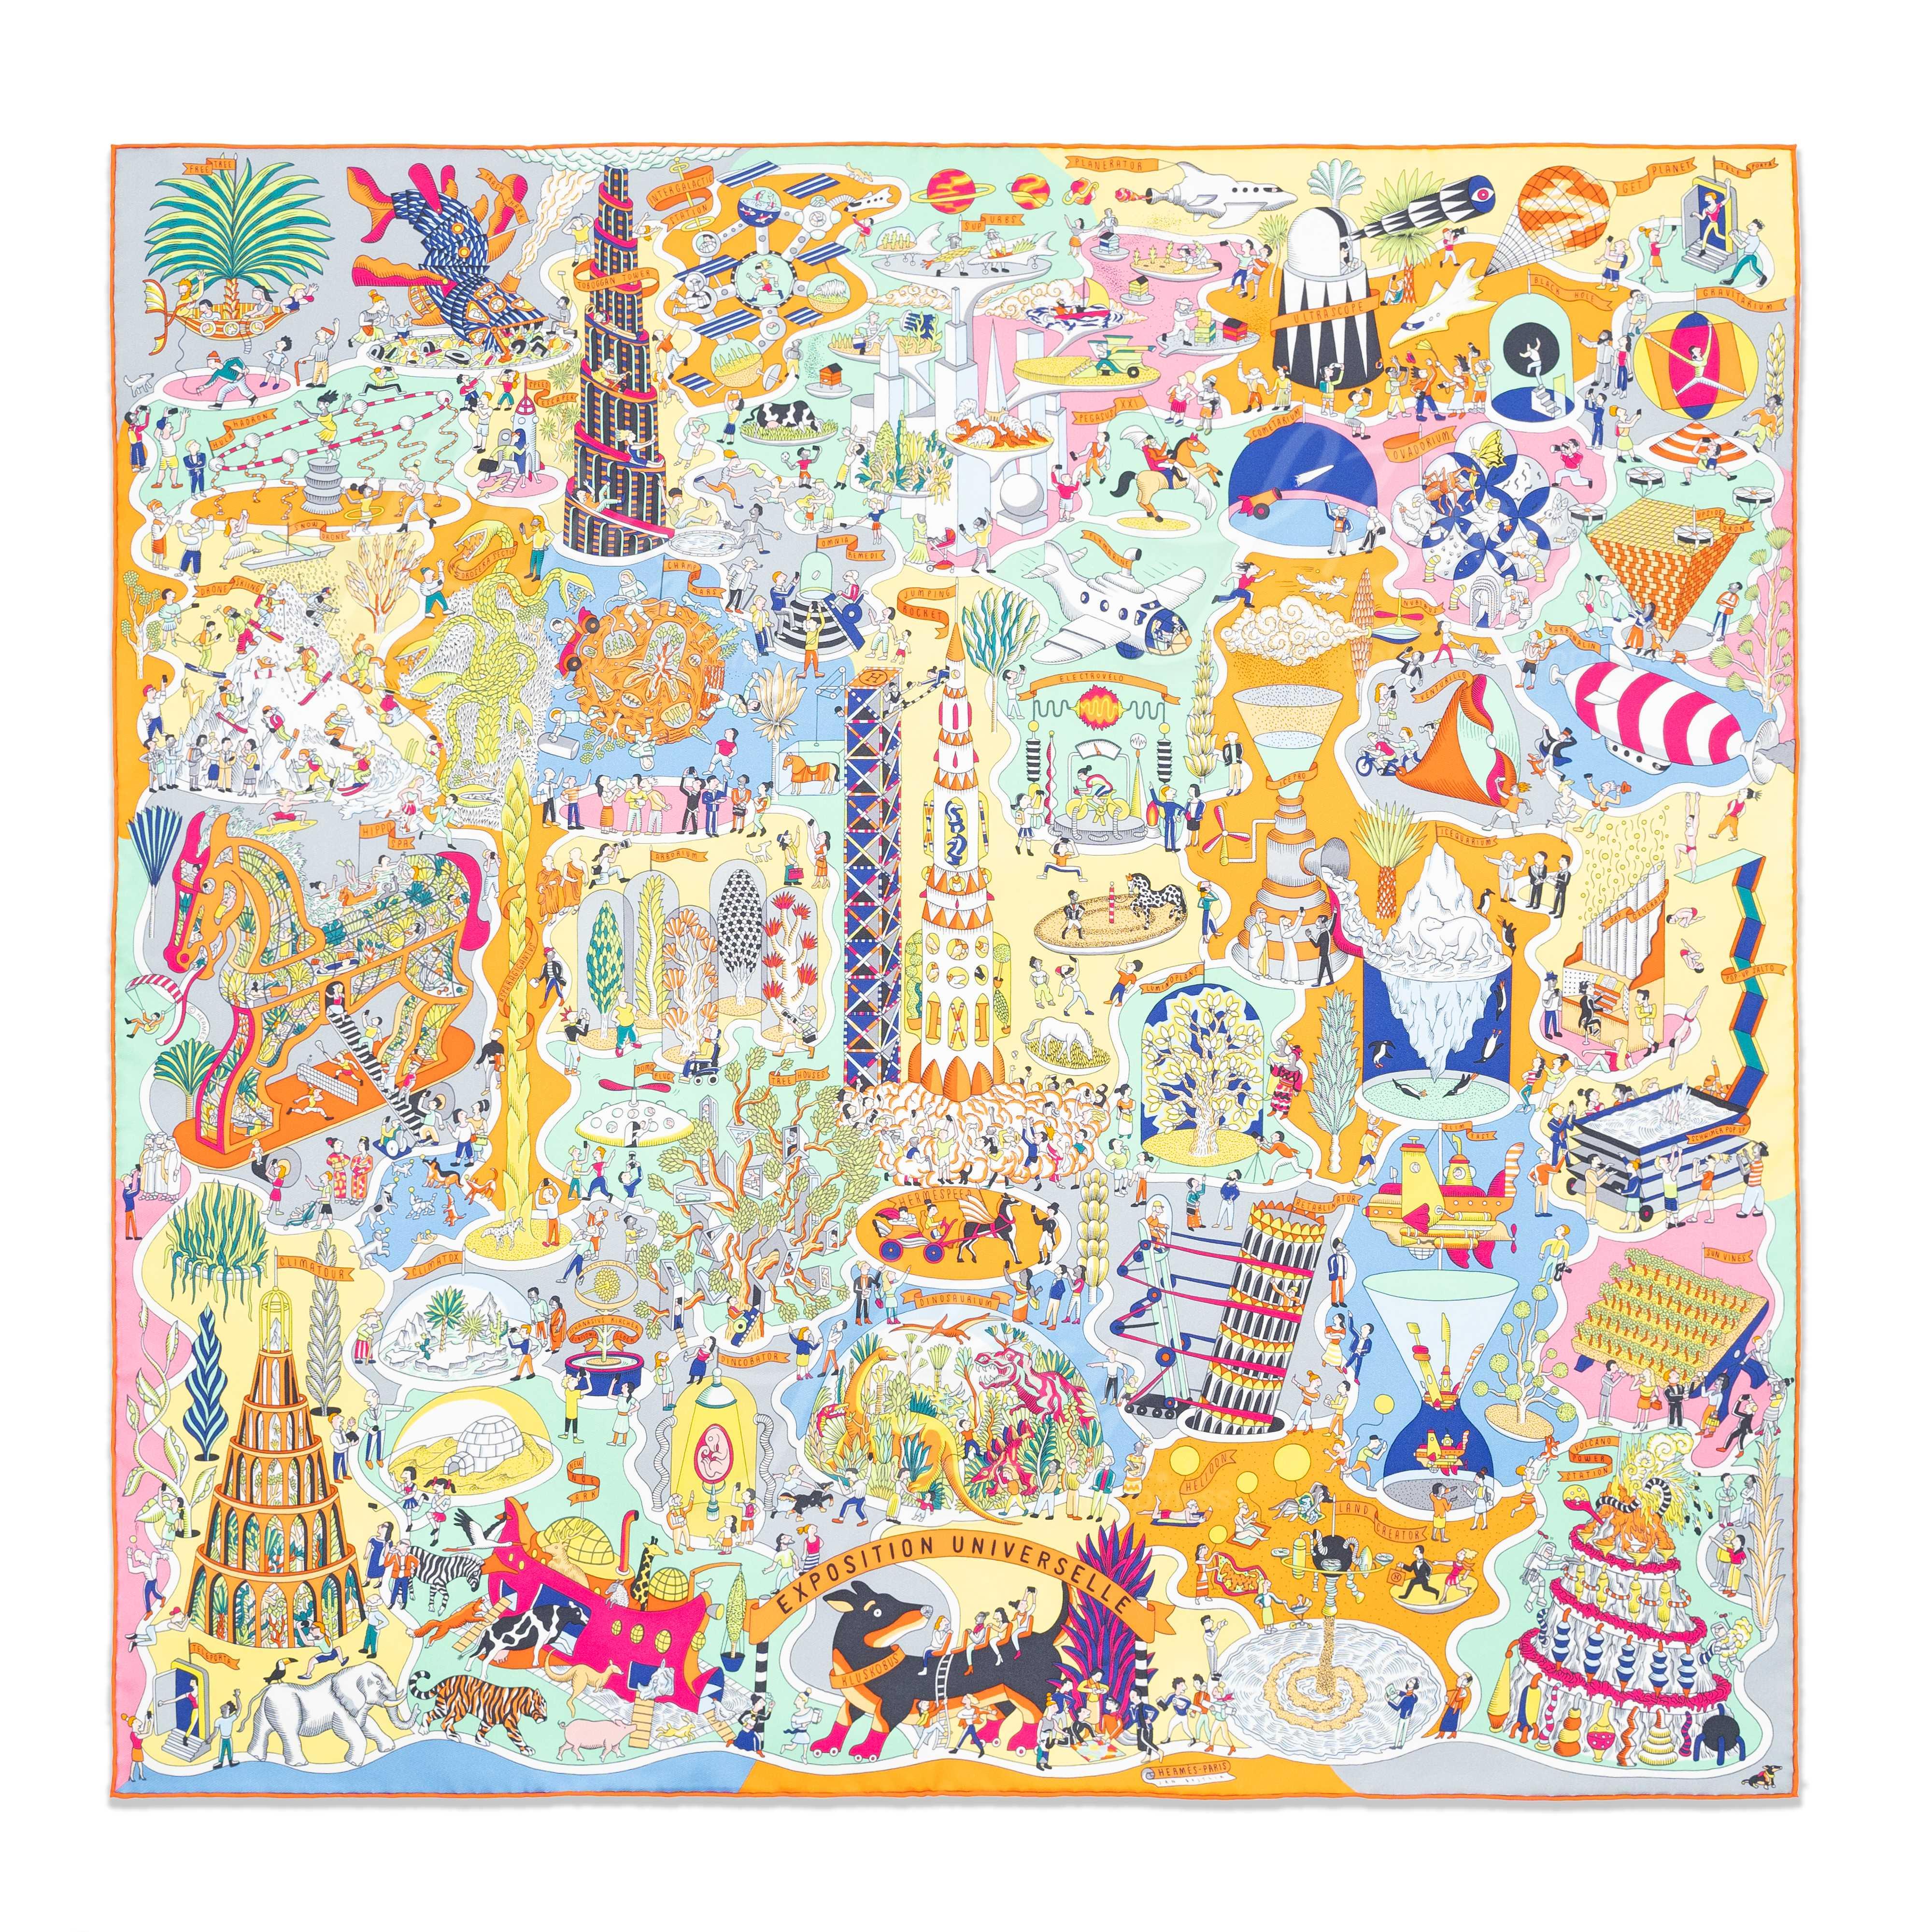 Hermes Exposition Universelle Scarf 90